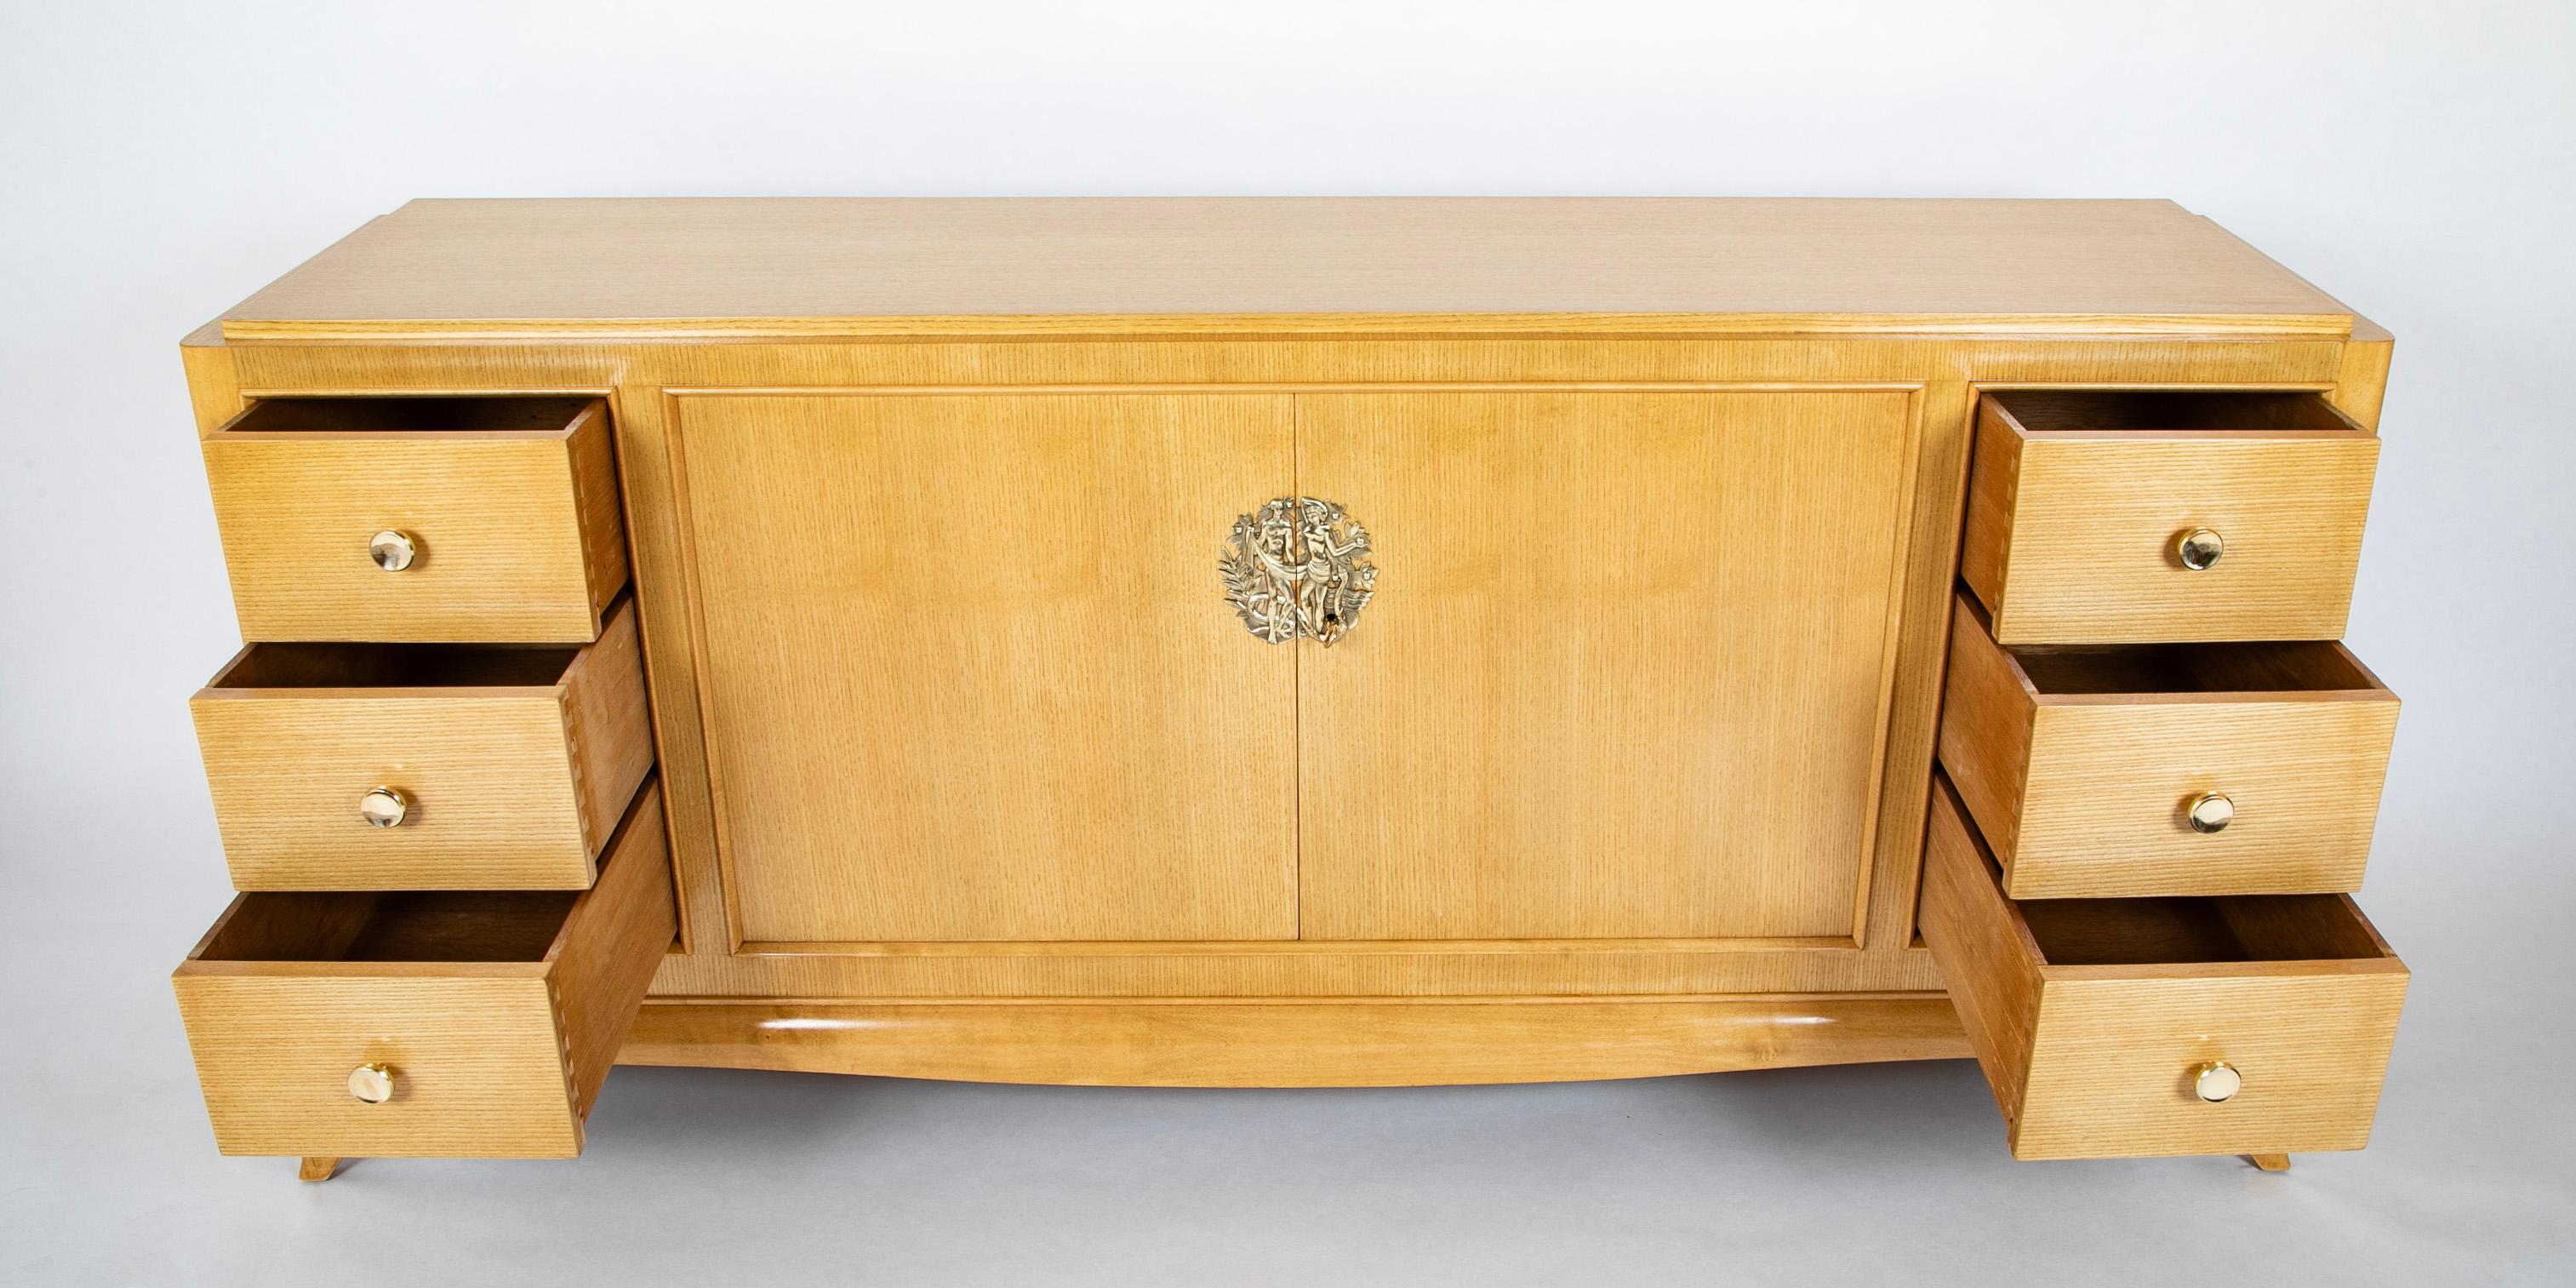 French School of Arbus Credenza in Light Wood with Adam & Eve Medallion For Sale 3